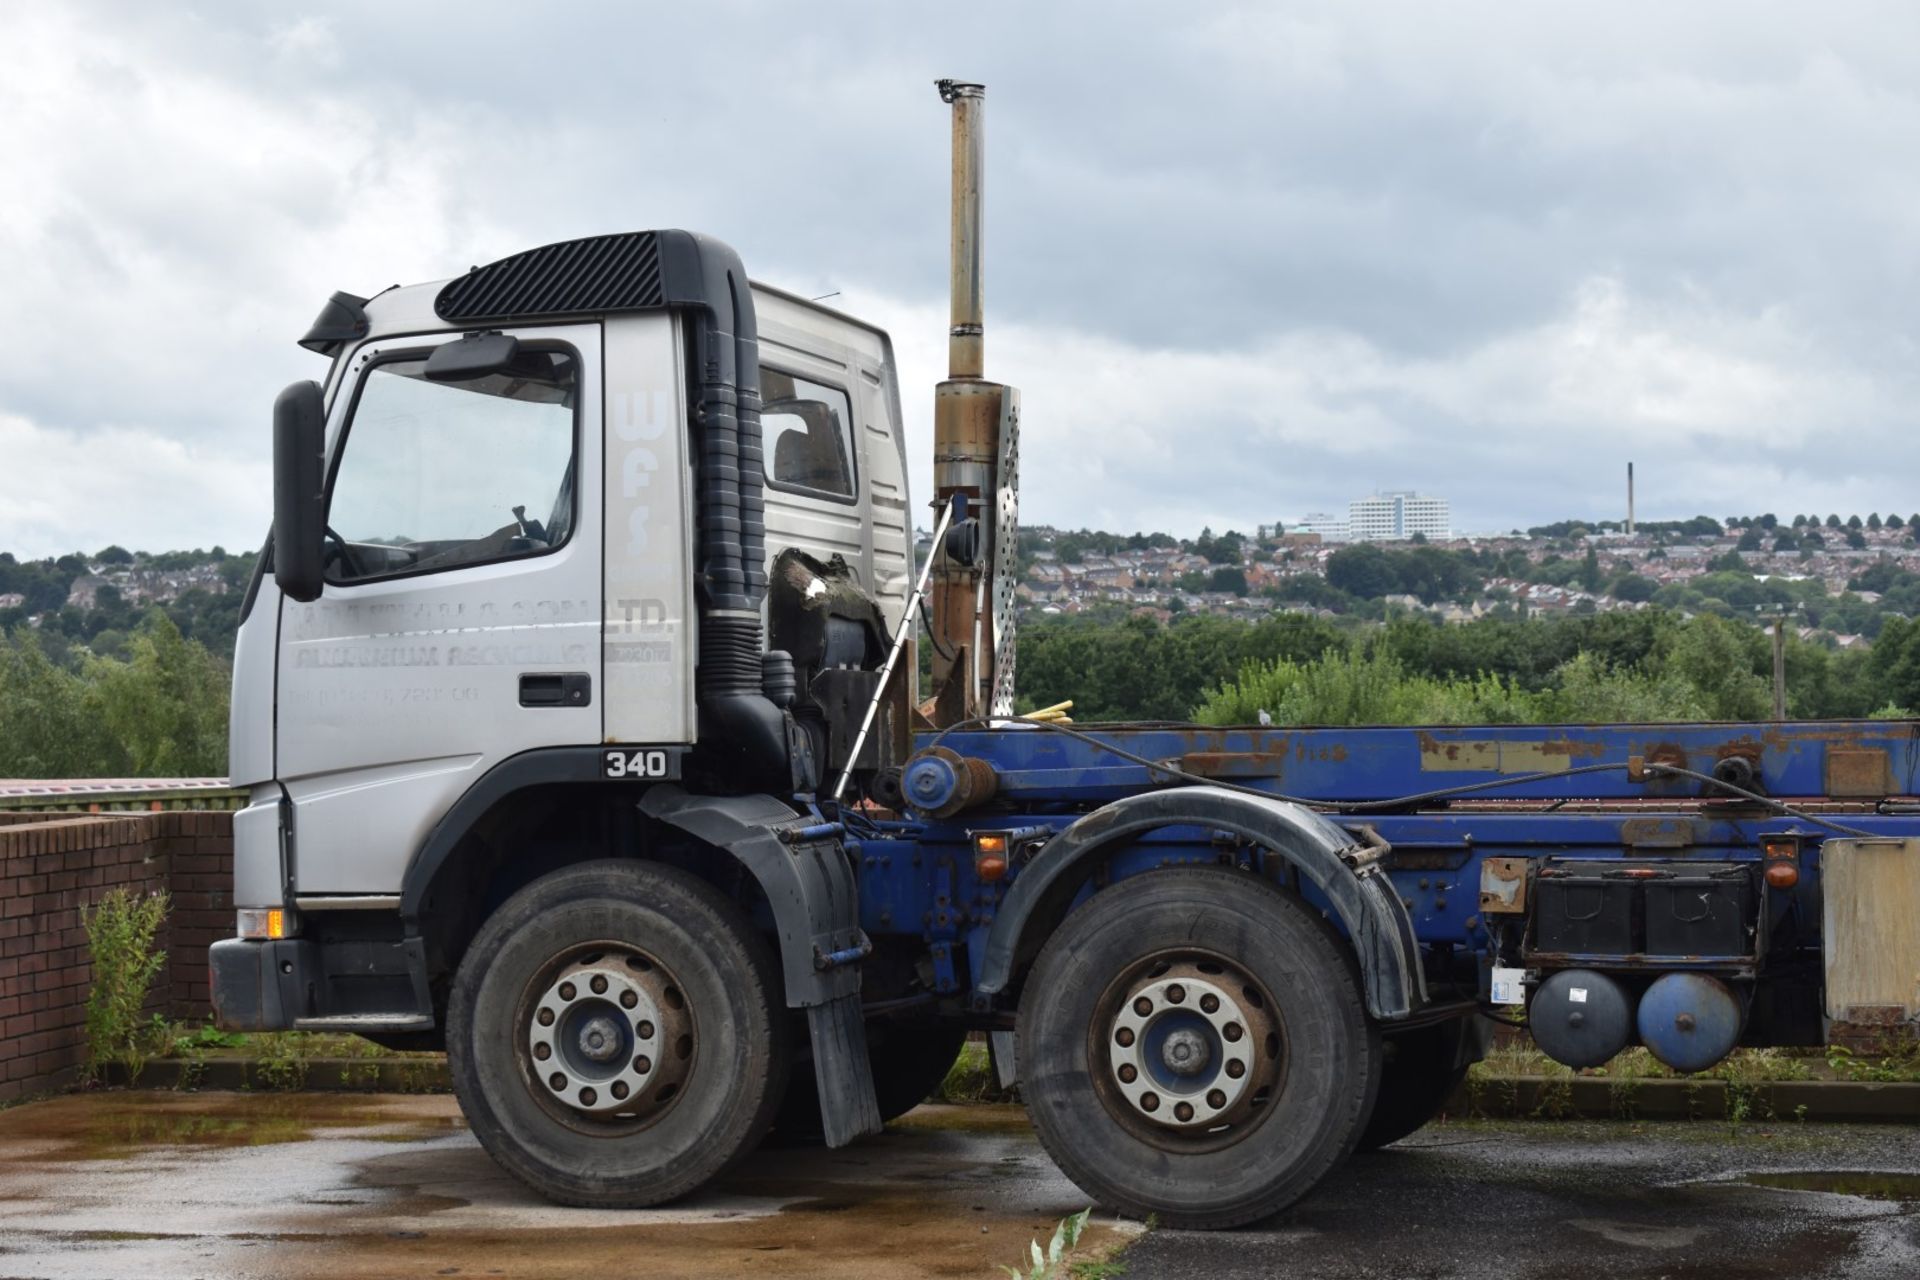 1 x Volvo 340 Plant Lorry With Tipper Chasis and Fitted Winch - CL547 - Location: South Yorkshire. - Image 11 of 25